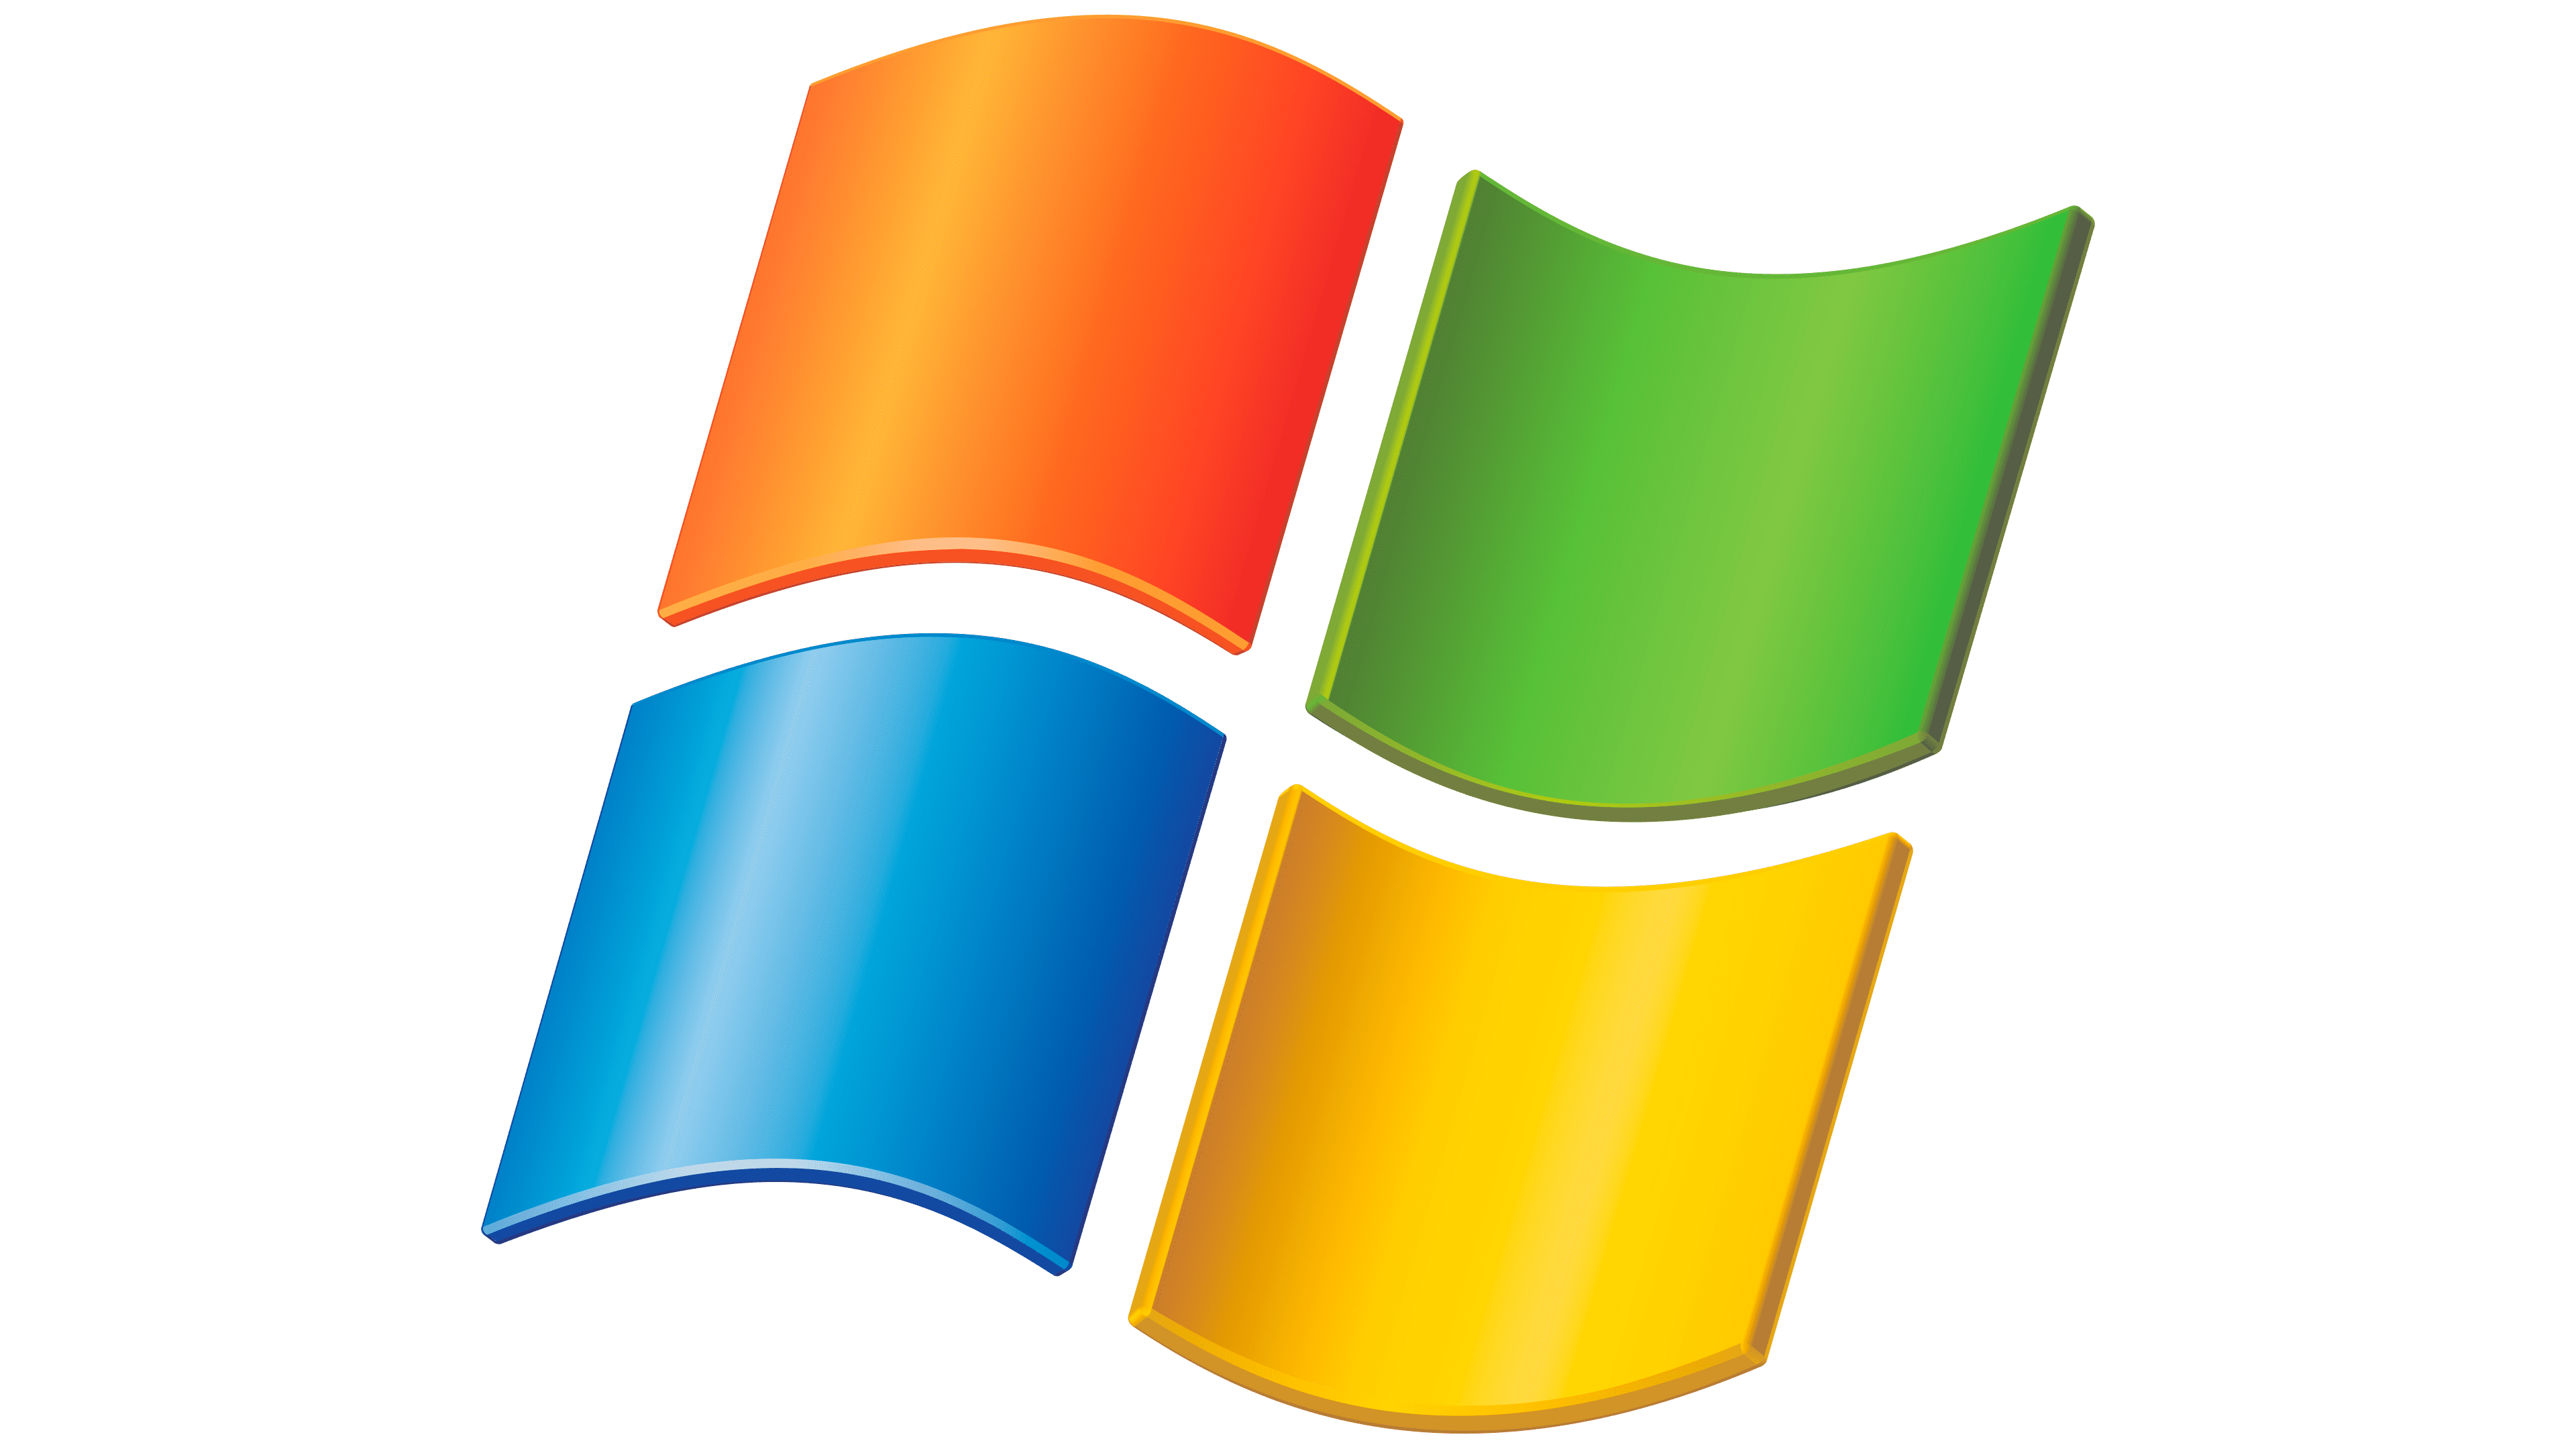 Windows Logo Png Image Png All Images